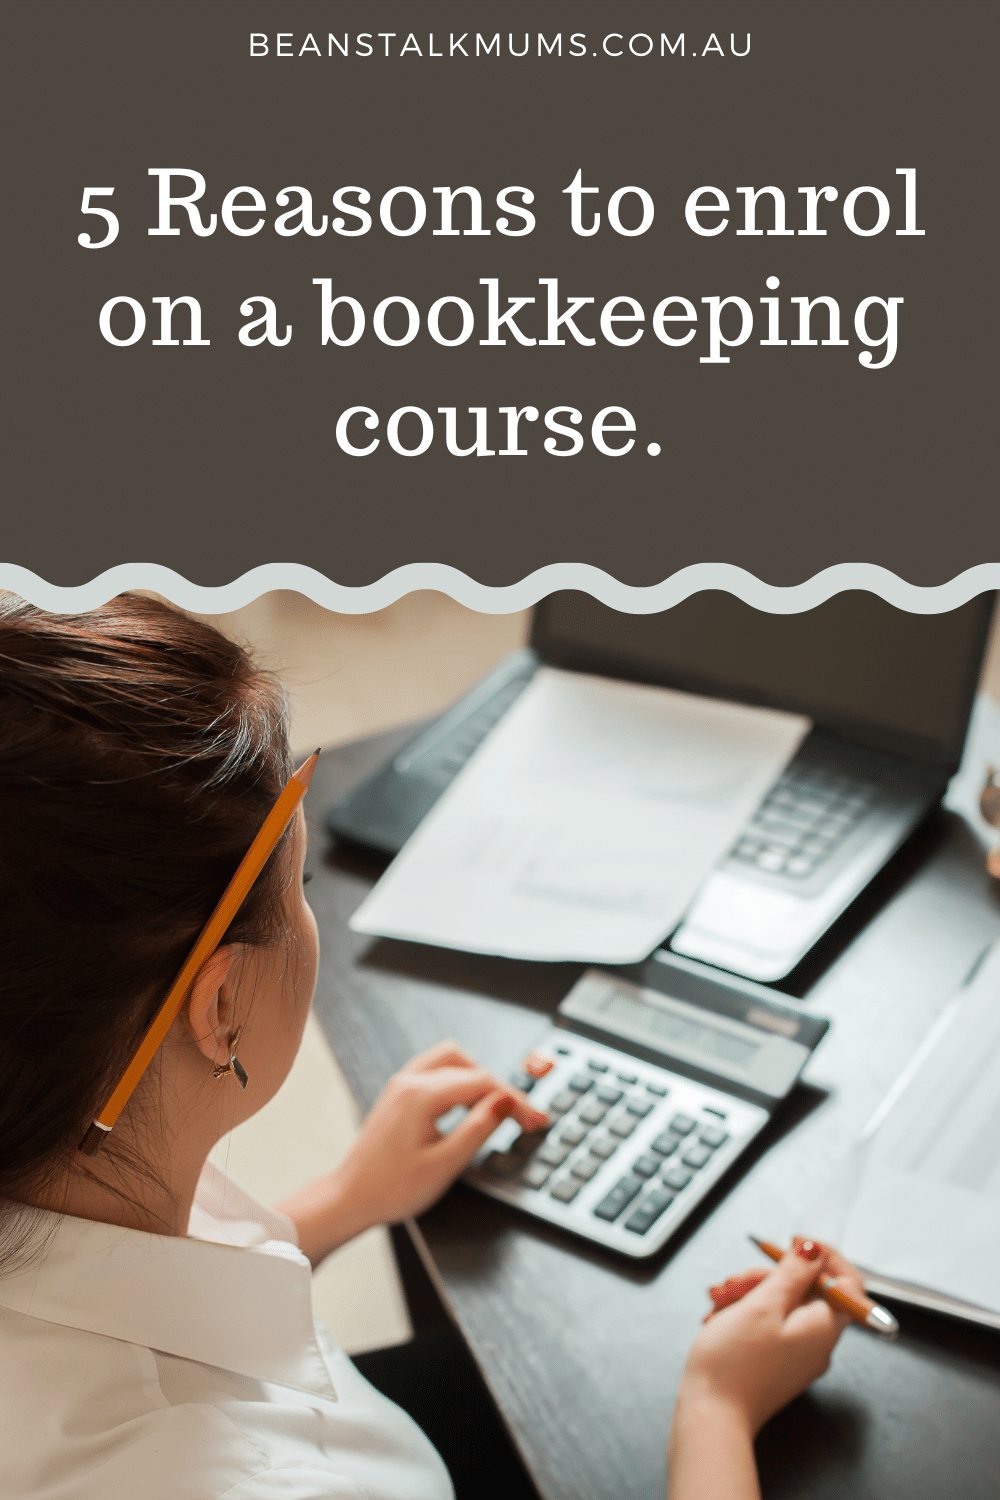 Bookkeeping course